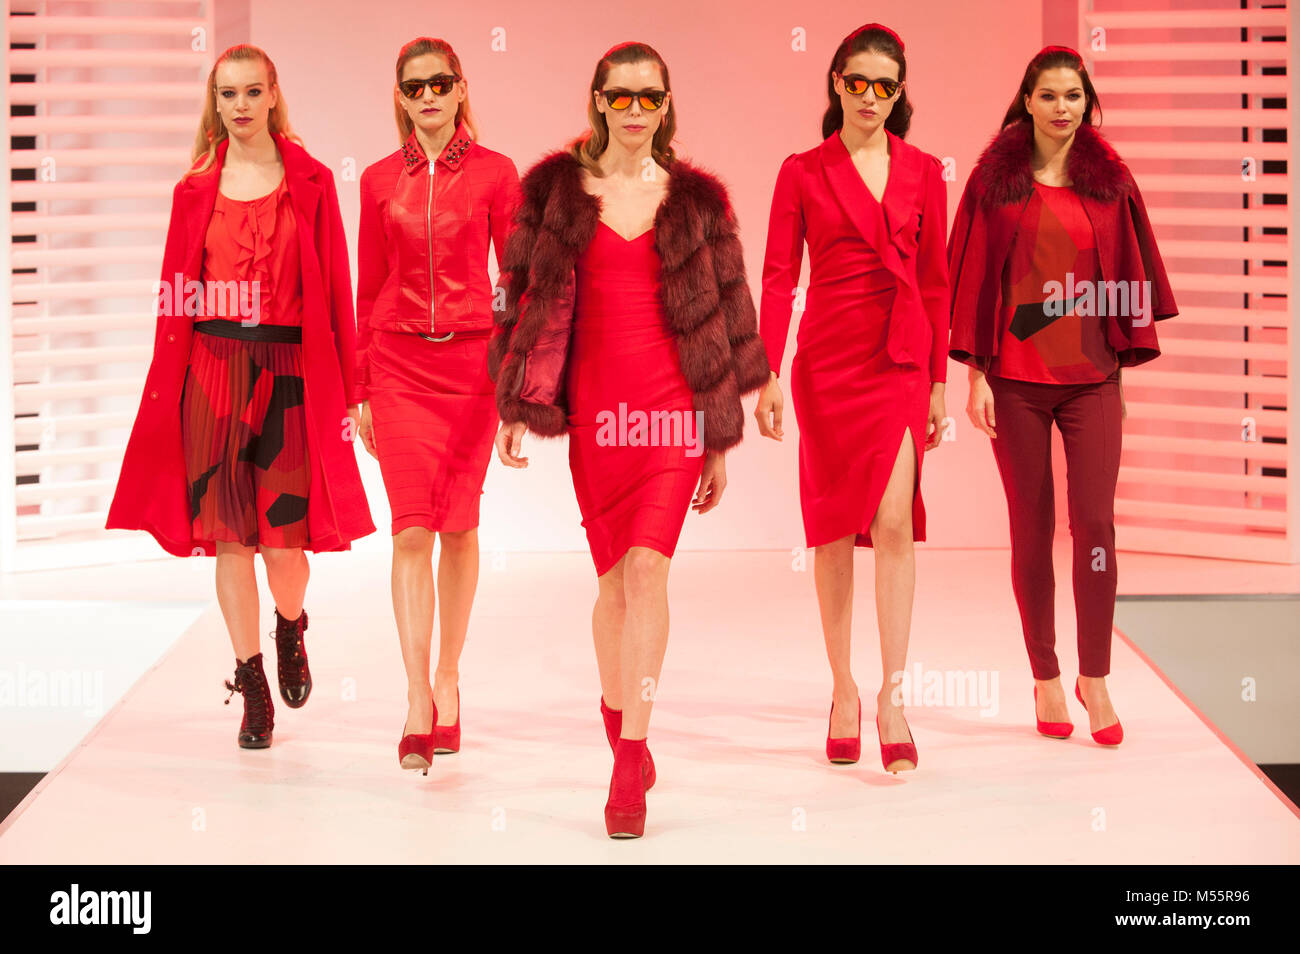 Fashion models during the Red Alert catwalk sequence at Moda. The trade fashion show ran 18th-20th February 2018 at the NEC, Birmingham, UK. Key trends highlighted for Autumn/Winter 2018  included red and burgundy, often in conjunction with black, and a major return for leopard print. Three separate catwalk shows, Moda Directions, Moda Gent, and Moda Woman, took place every day. Credit: Antony Nettle/Alamy Live News Stock Photo